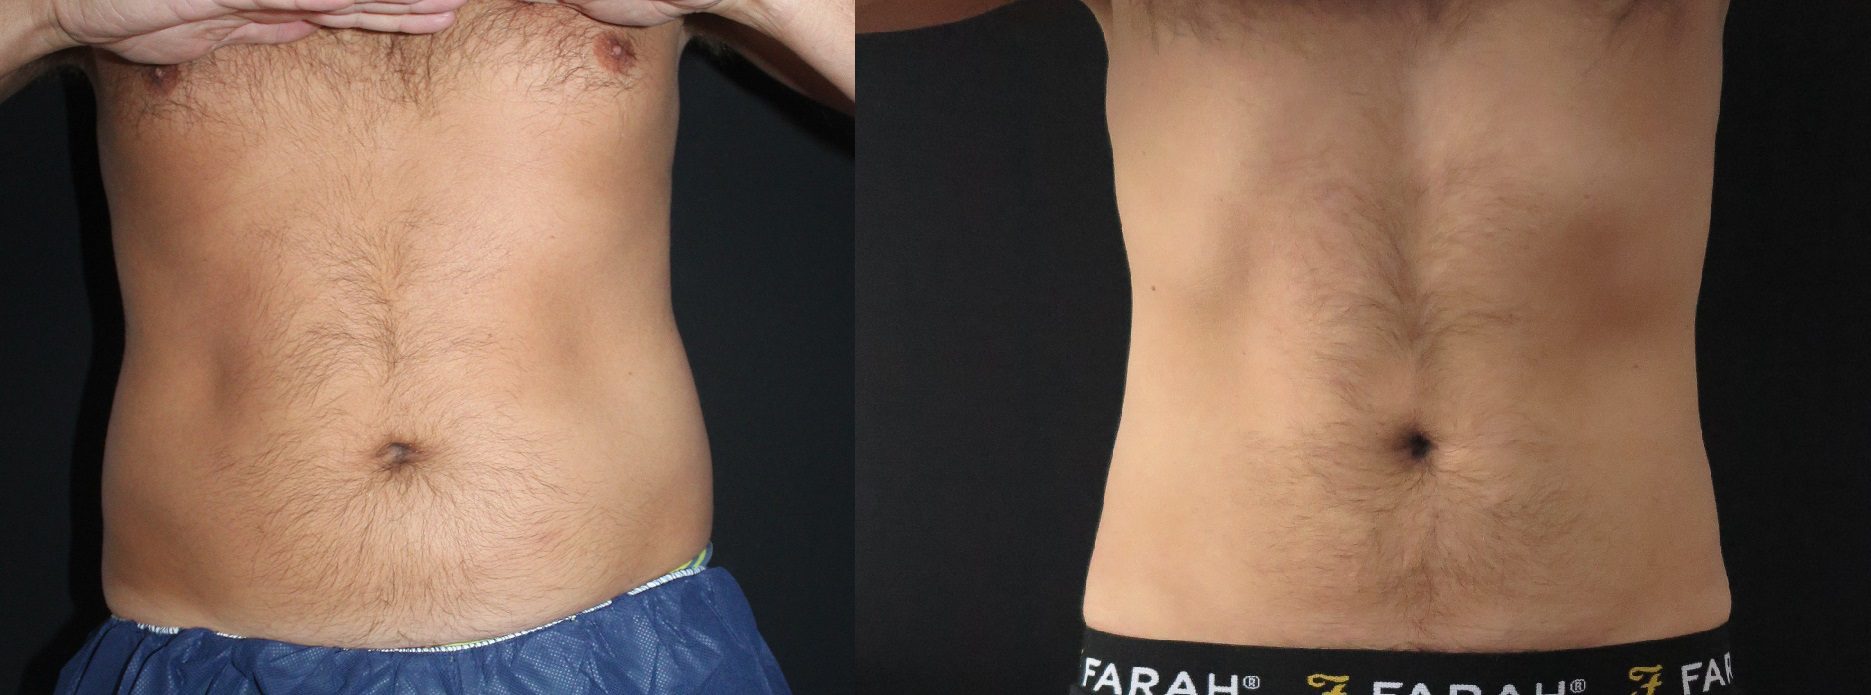 coolsculpting abdomen fat before and after